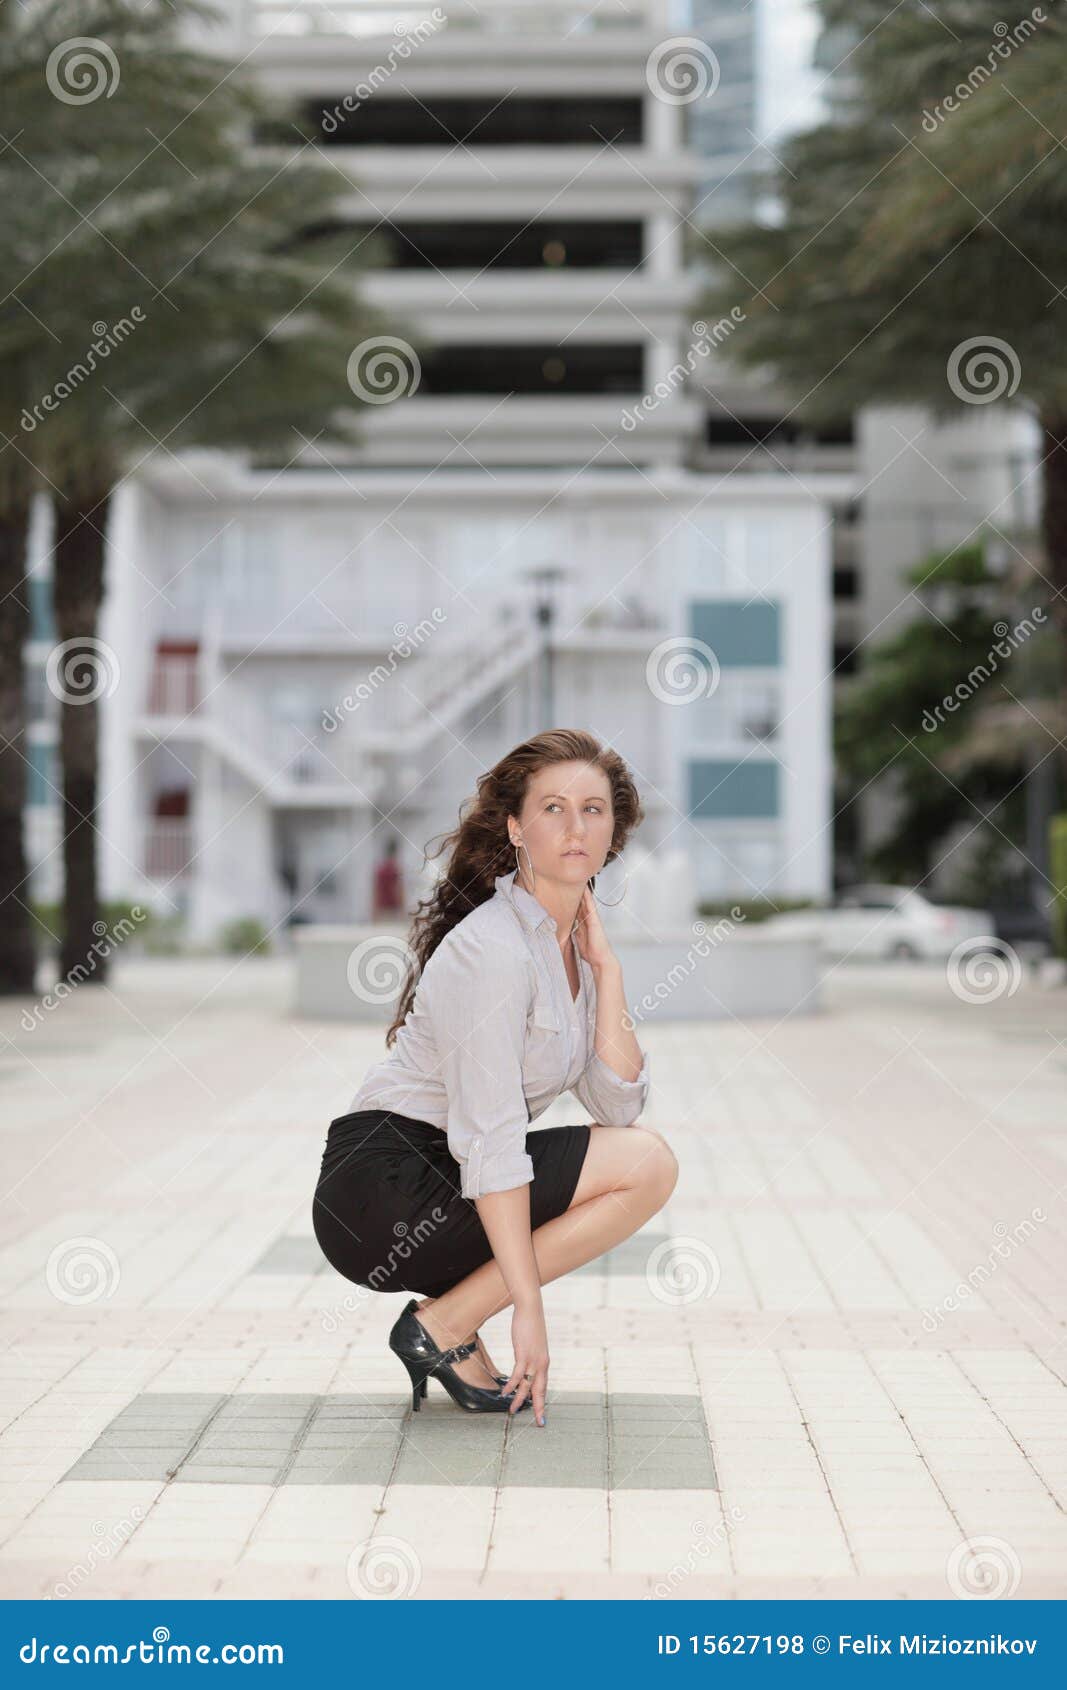 Image Of A Businesswoman Squatting Stock Photo - Image 